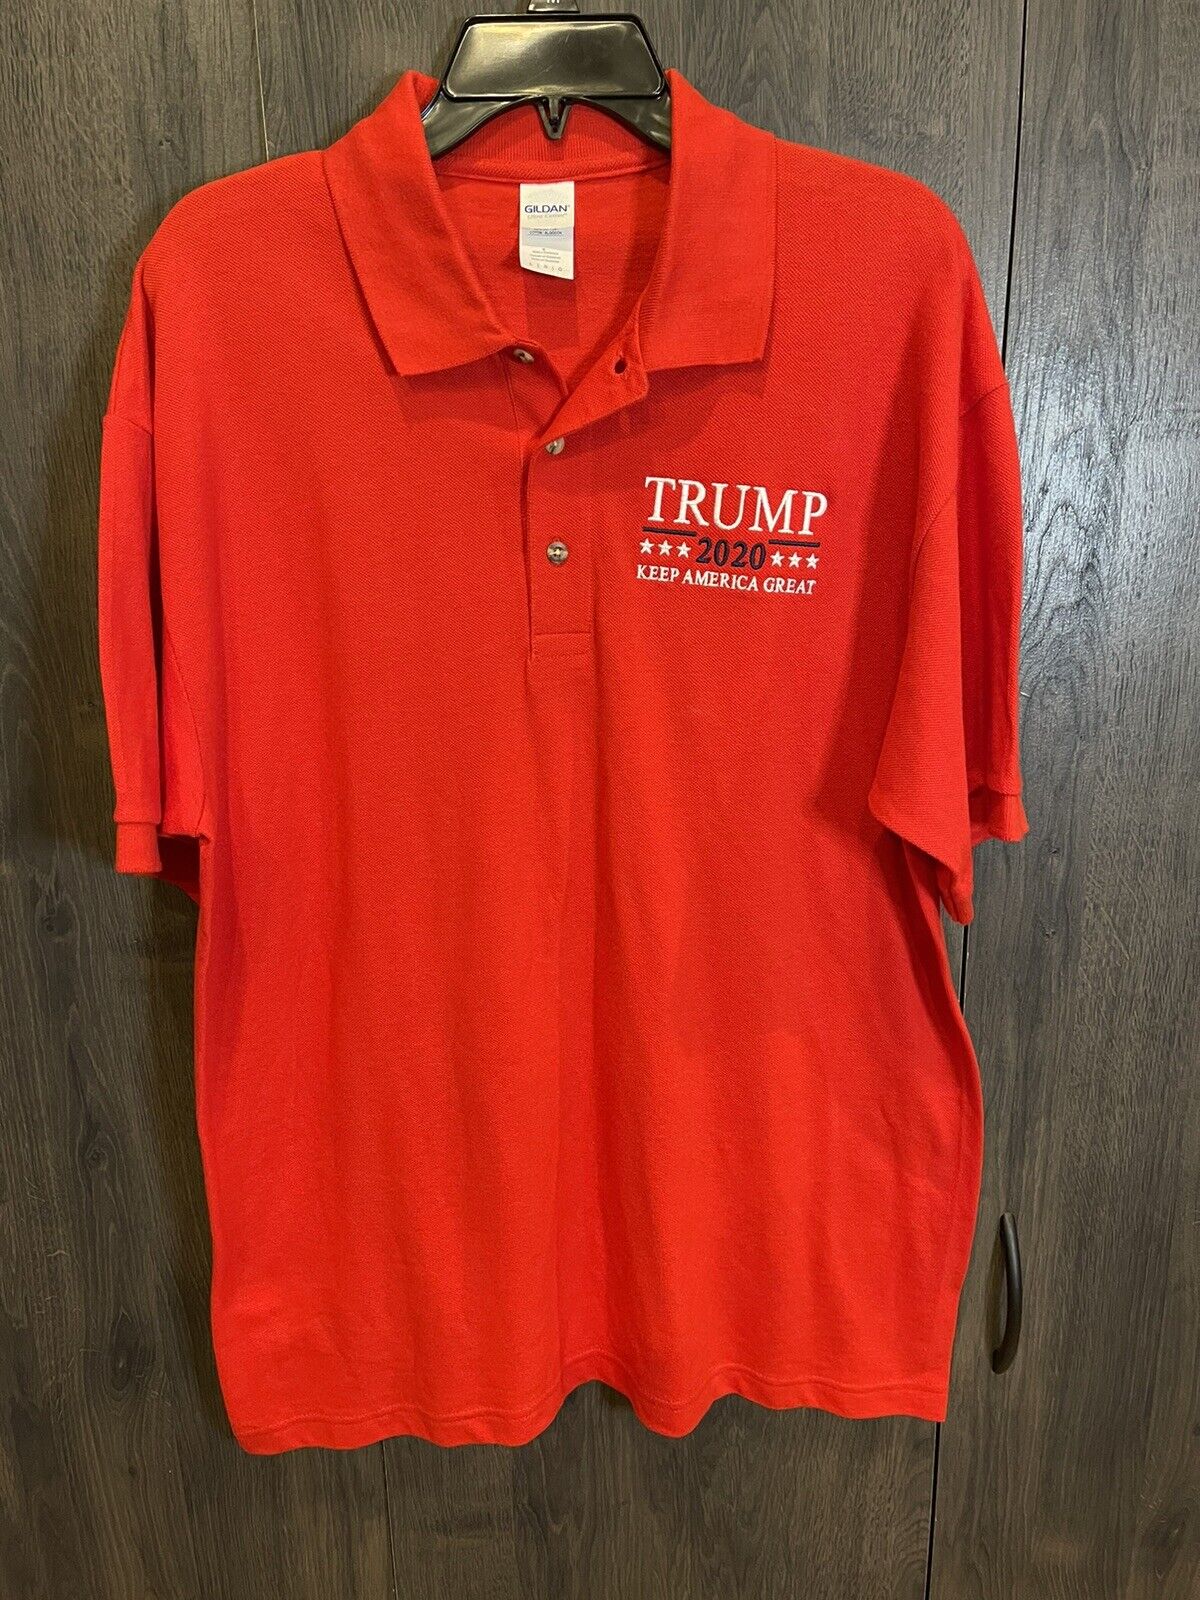 GENUINE Trump 45 President KEEP AMERICA GREAT 2020 OFFICIAL CAMPAIGN POLO Large